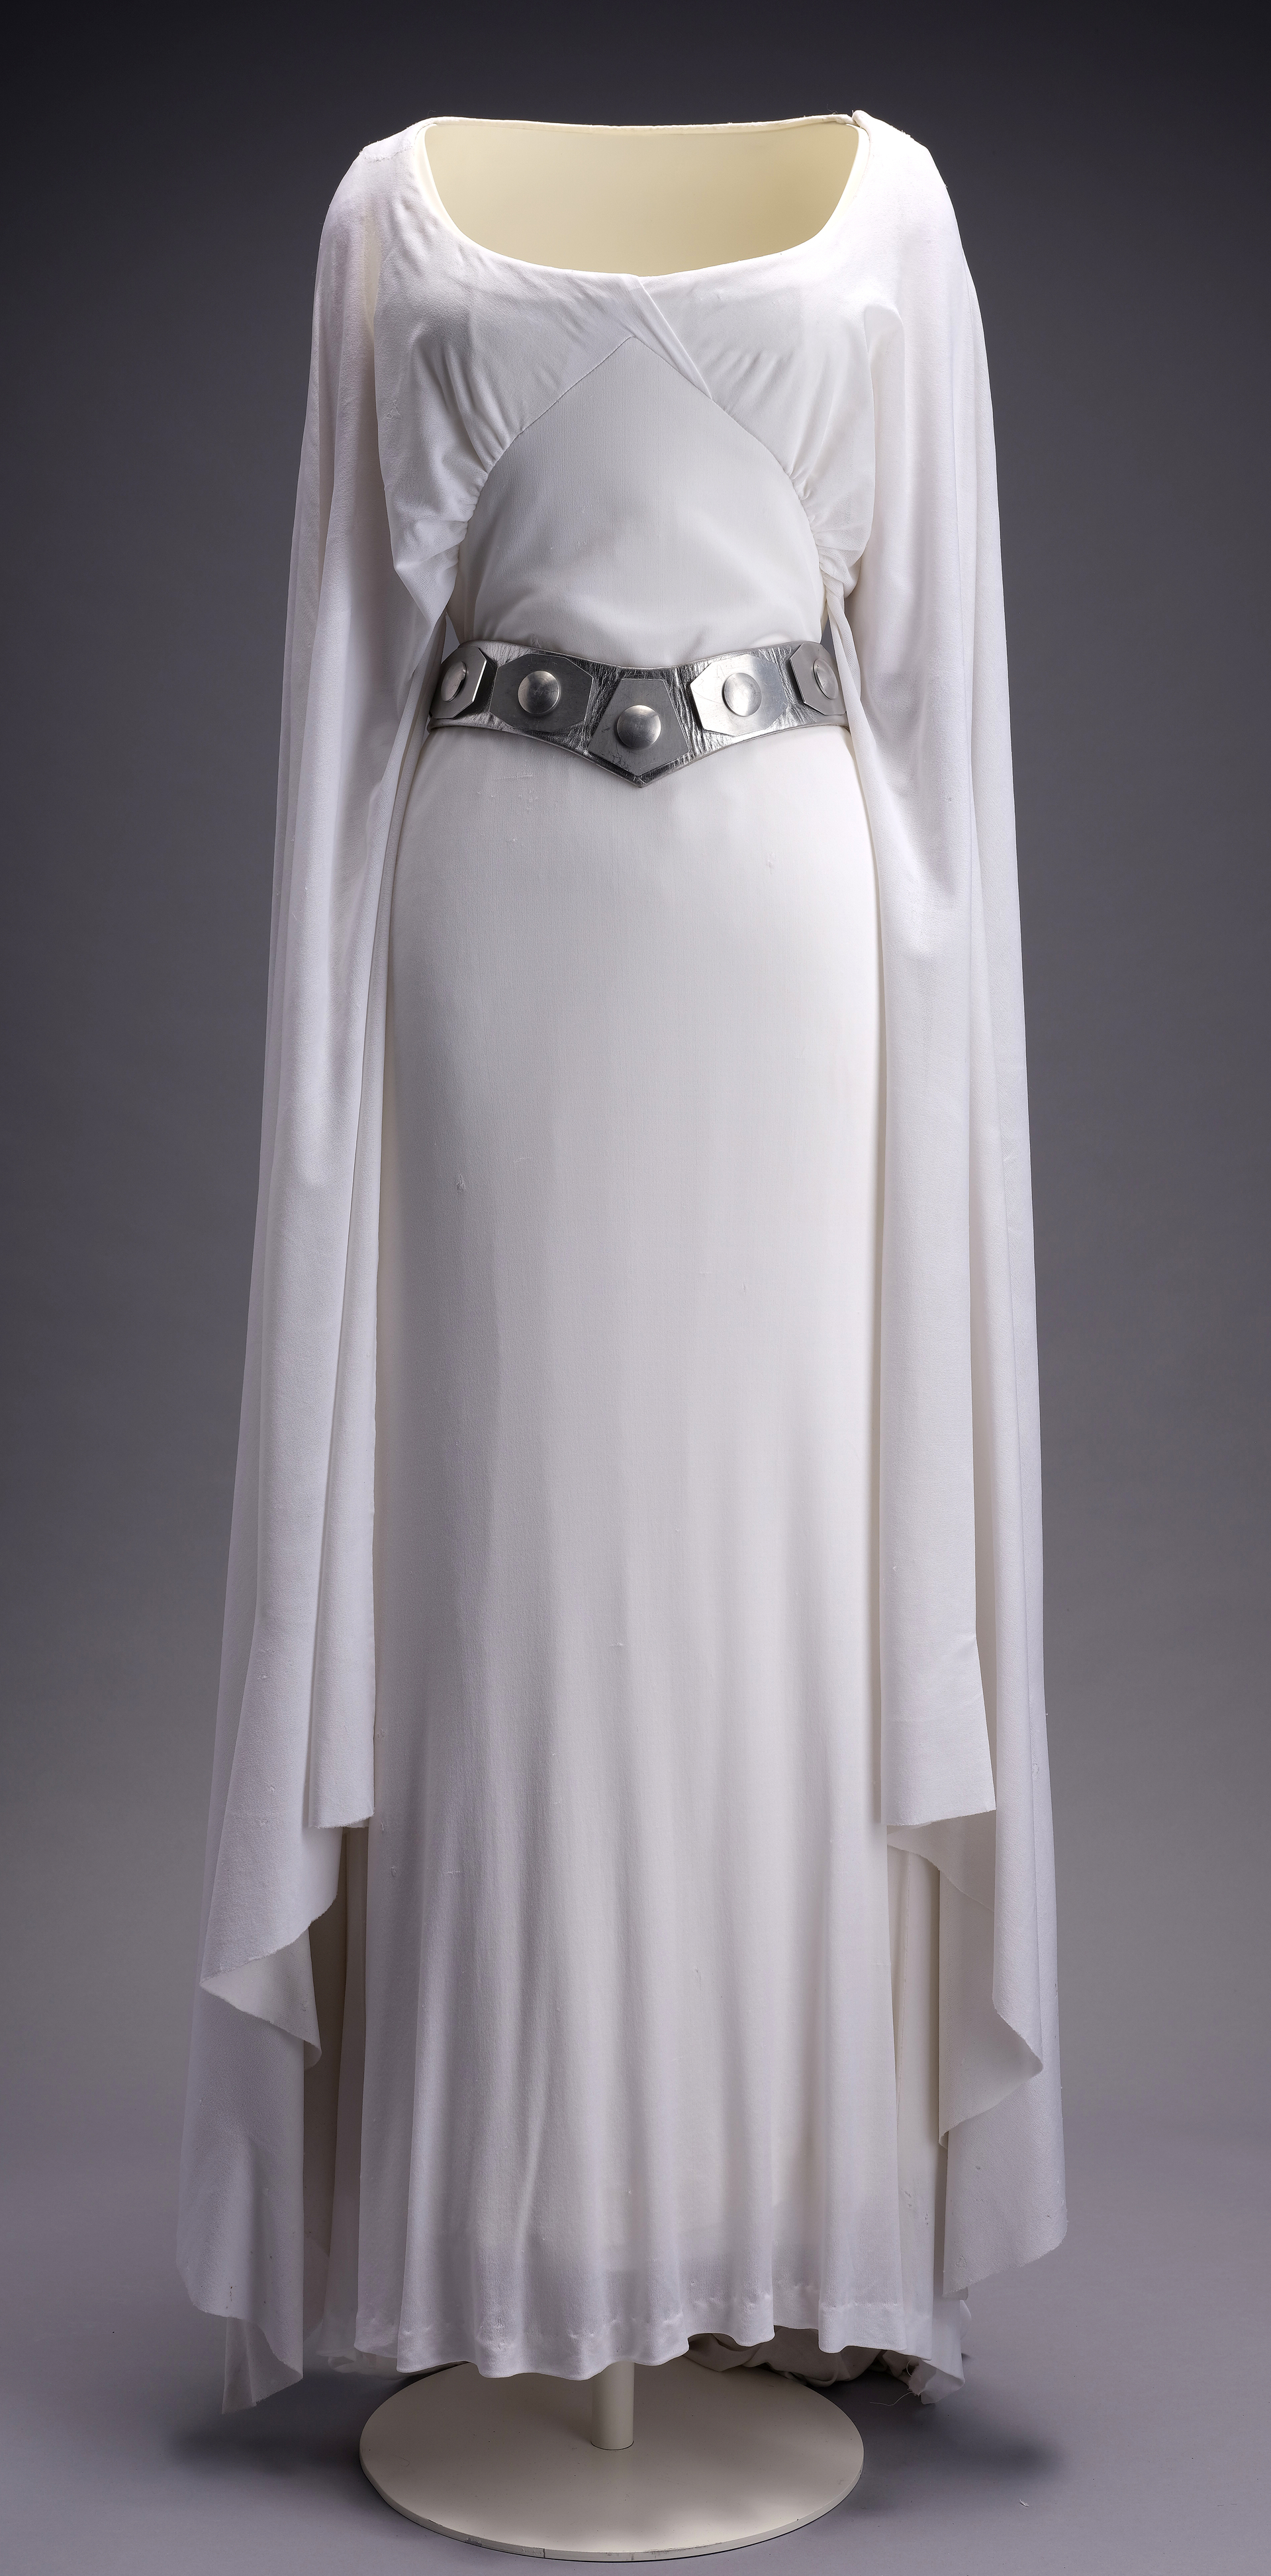 STAR WARS: A NEW HOPE (1977) - Princess Leia's (Carrie Fisher) Screen-Matched Ceremonial Dress - Image 14 of 39